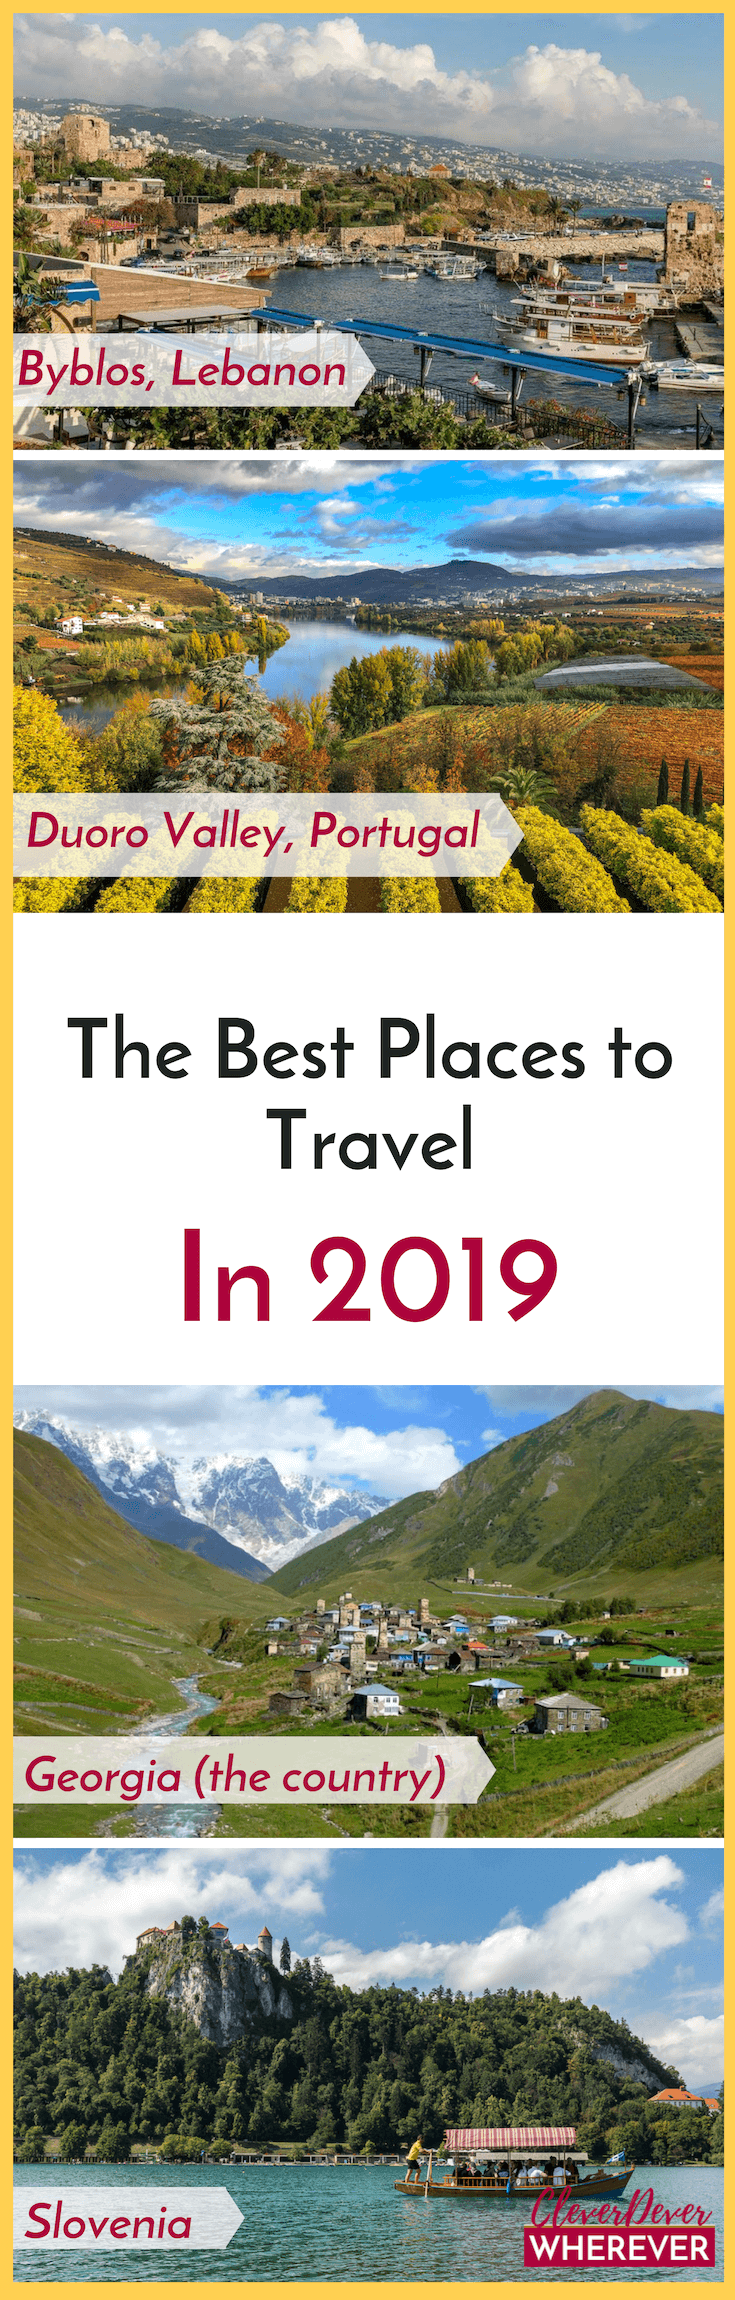 The best places to travel in 2019 #portugal #georgia #slovenia #lebanon #europe #middleeast #travellover #travel #besttrip #bestdestination 